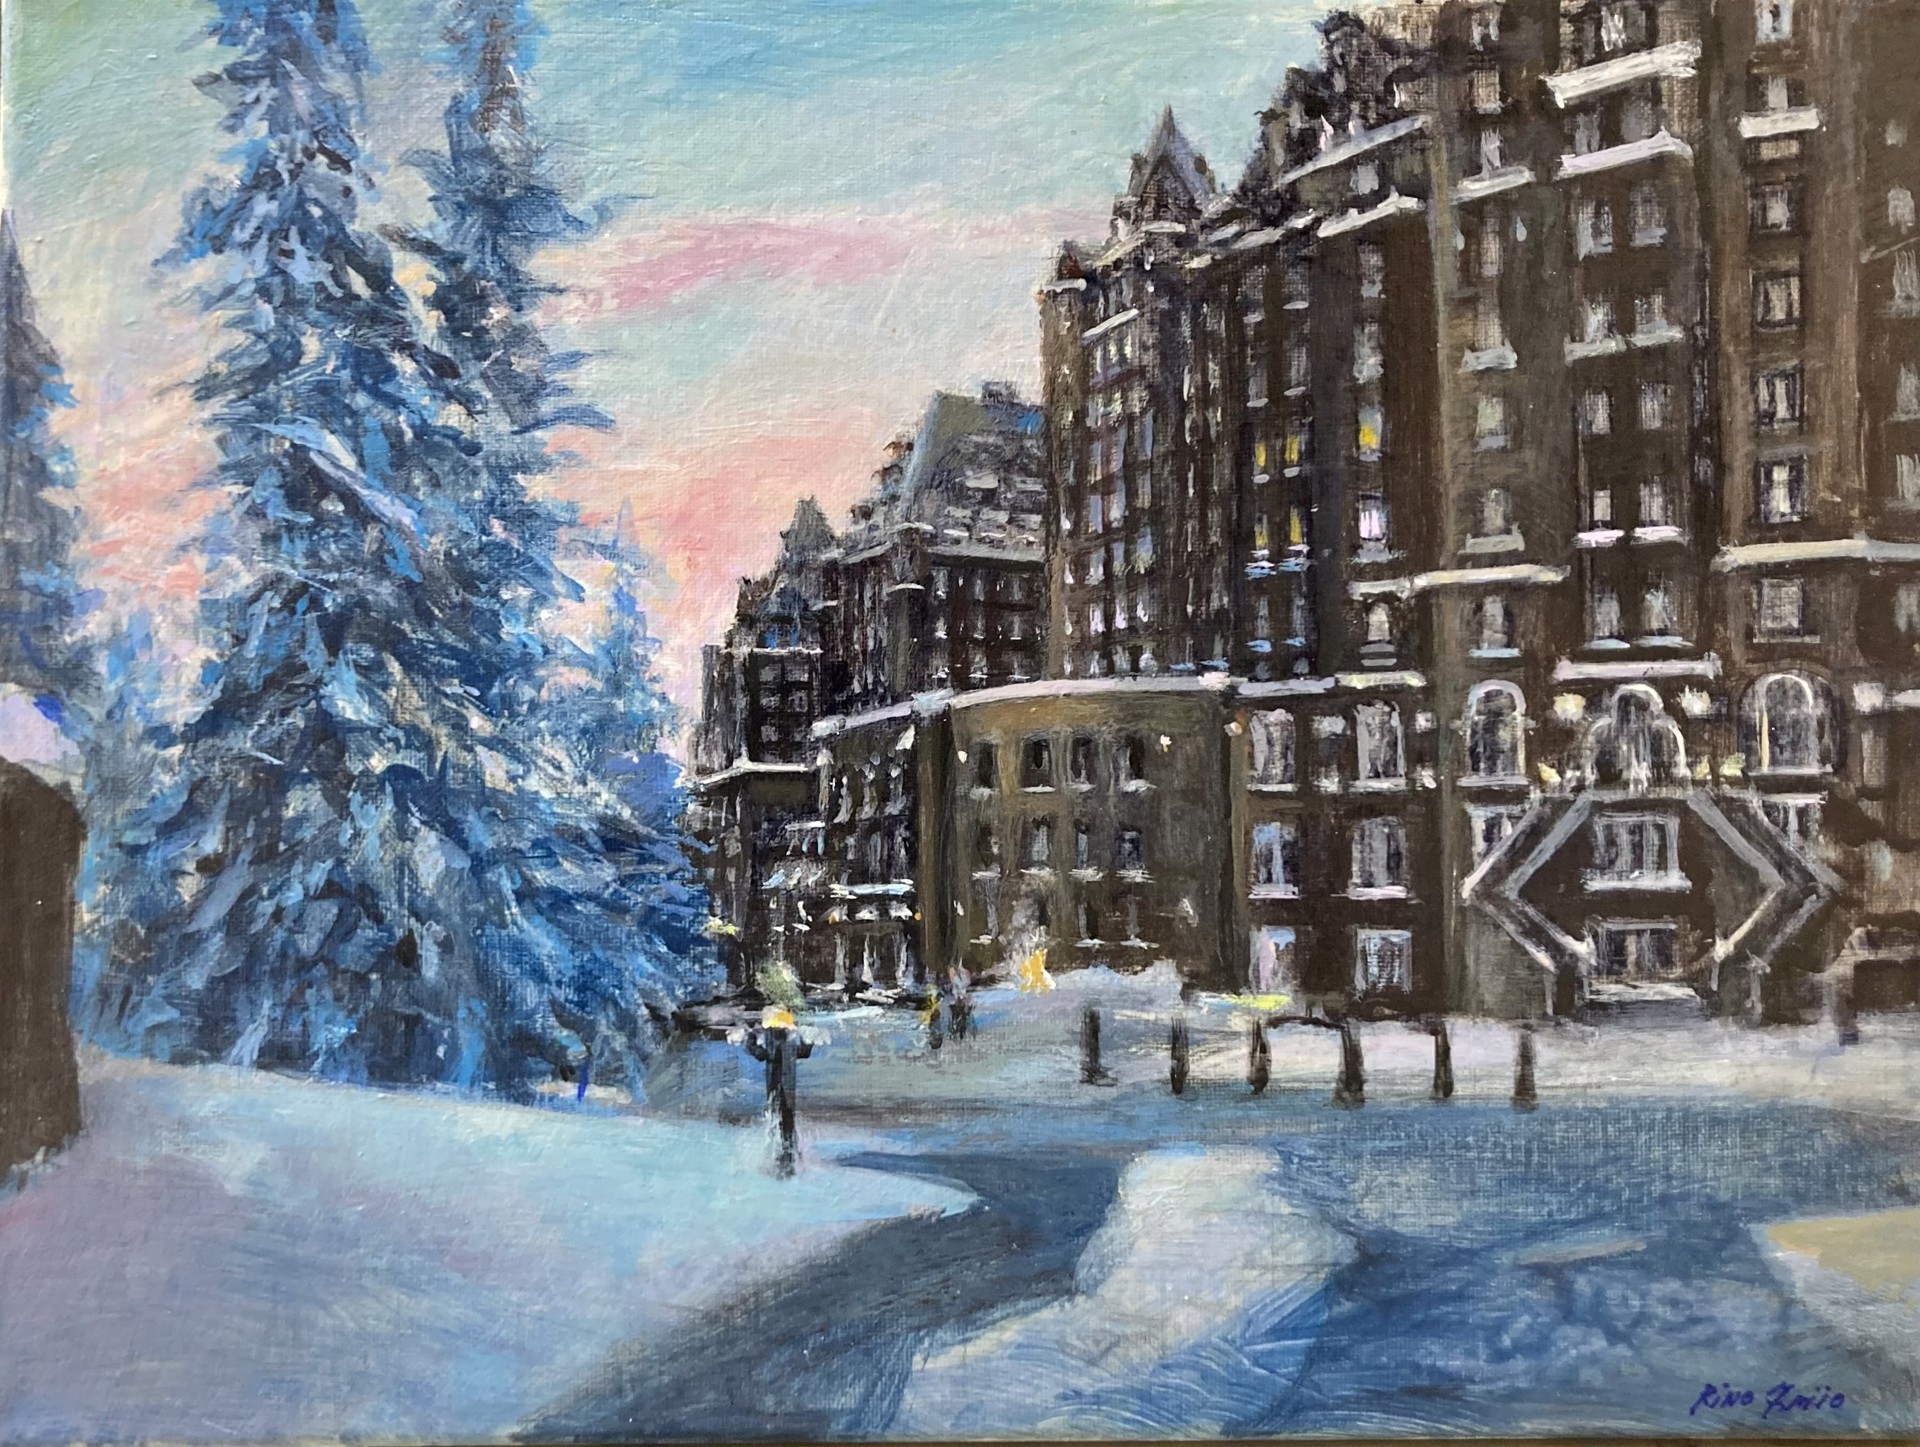 Winter Sunset at the Banff Springs by Rino Friio